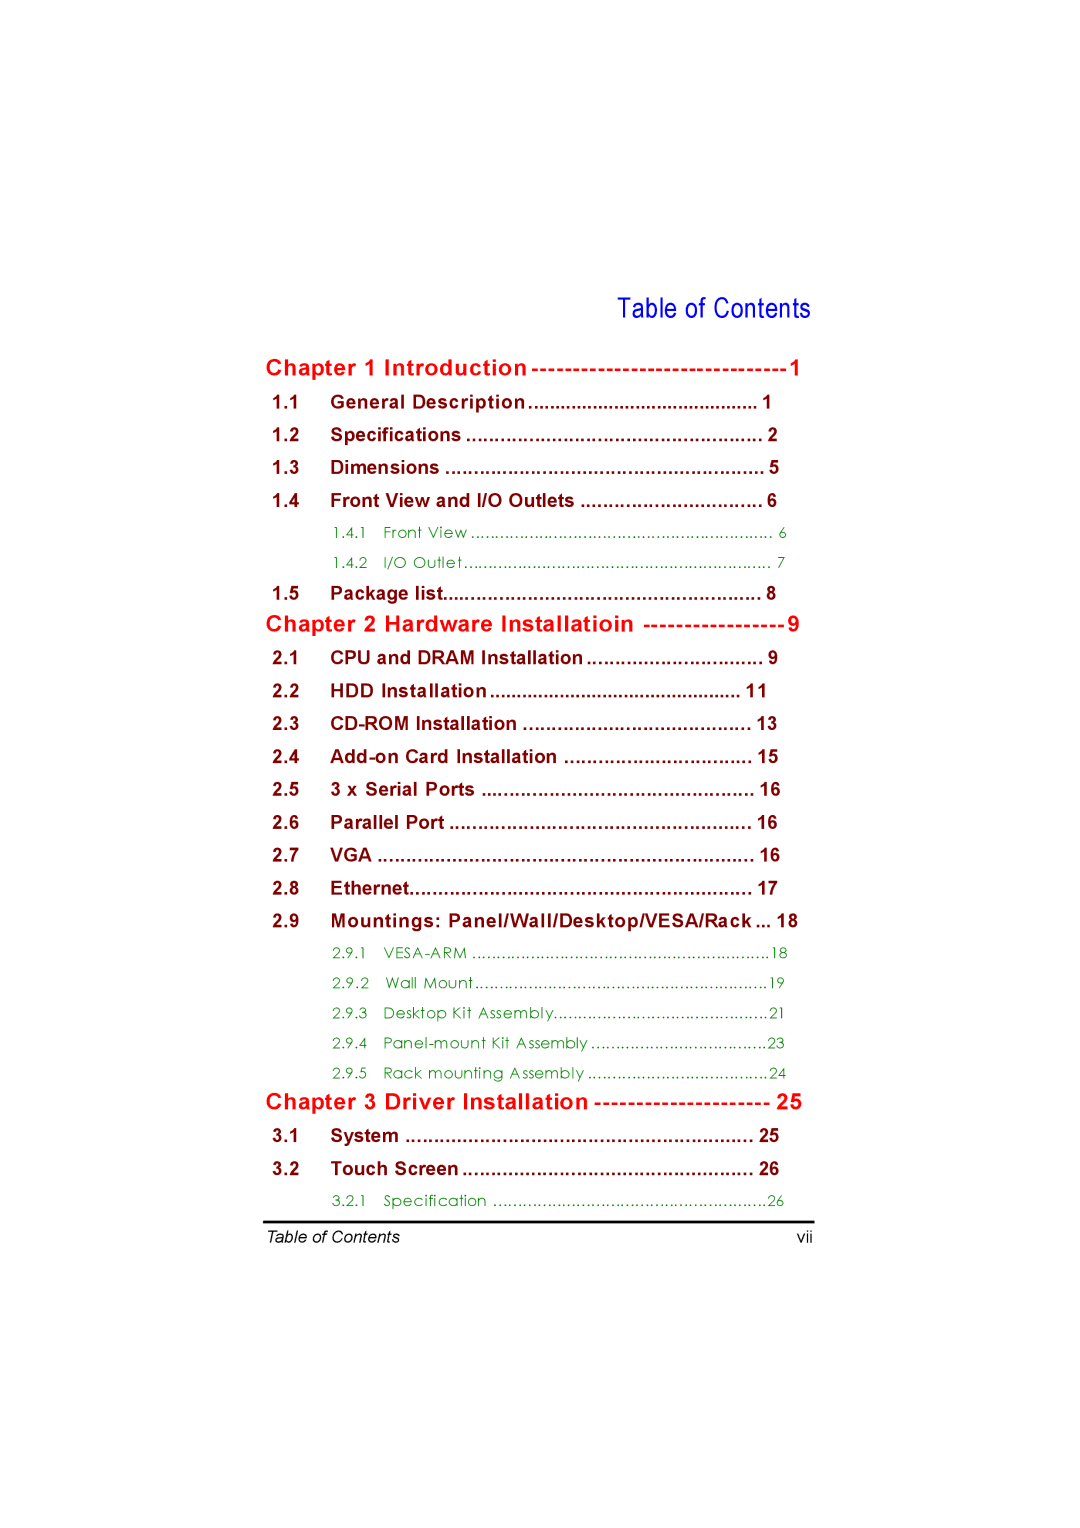 Acnodes PC 6170 manual Table of Contents 